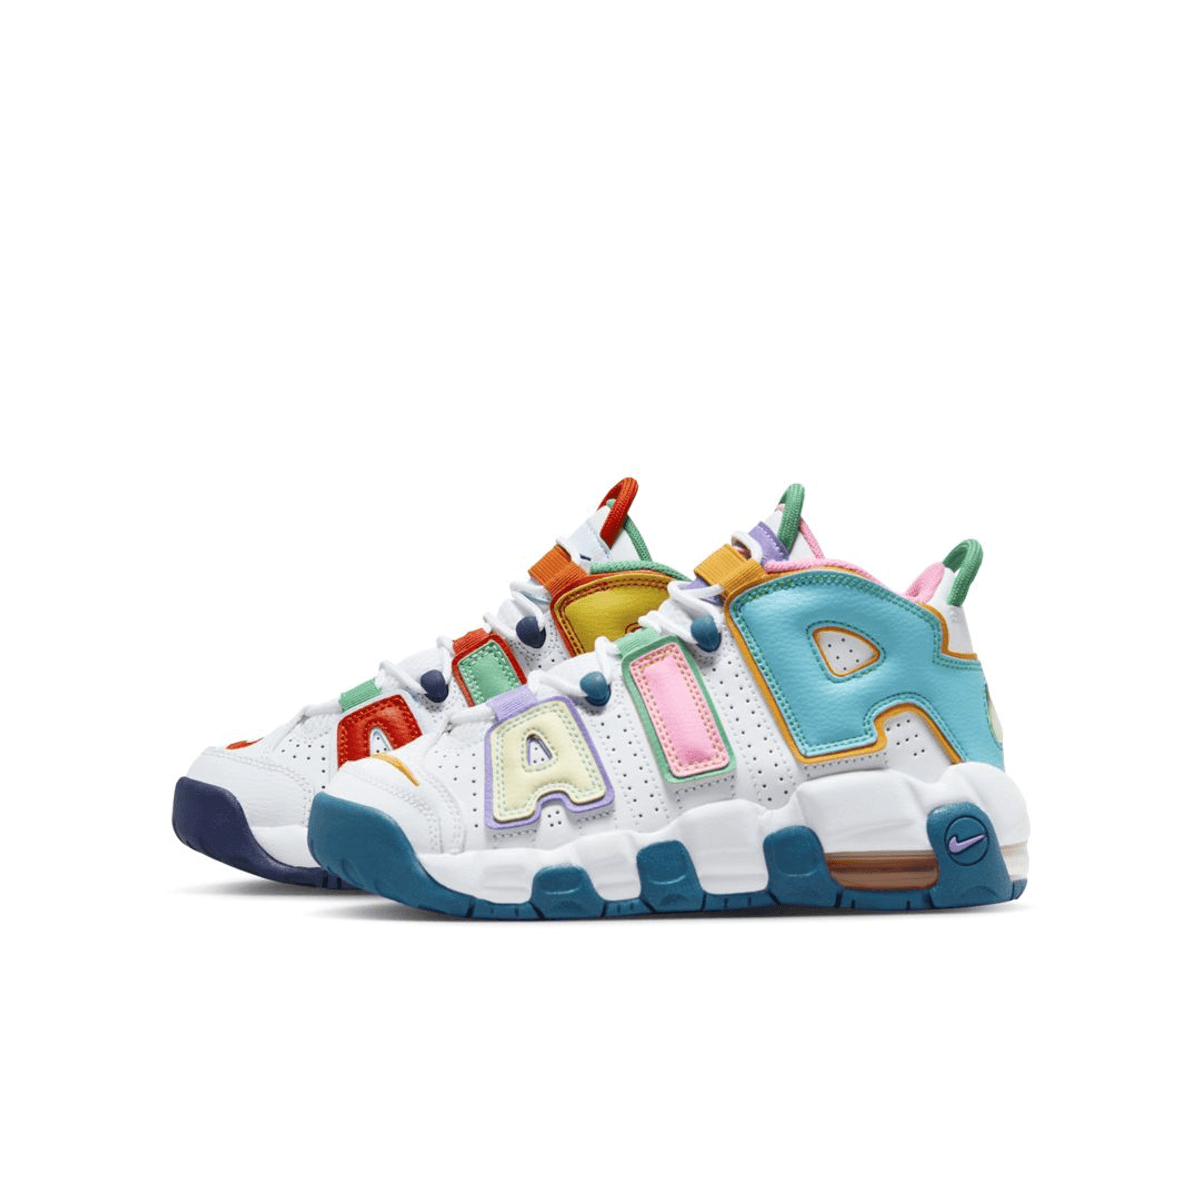 The Nike Air More Uptempo GS “What The” Releases November 3rd